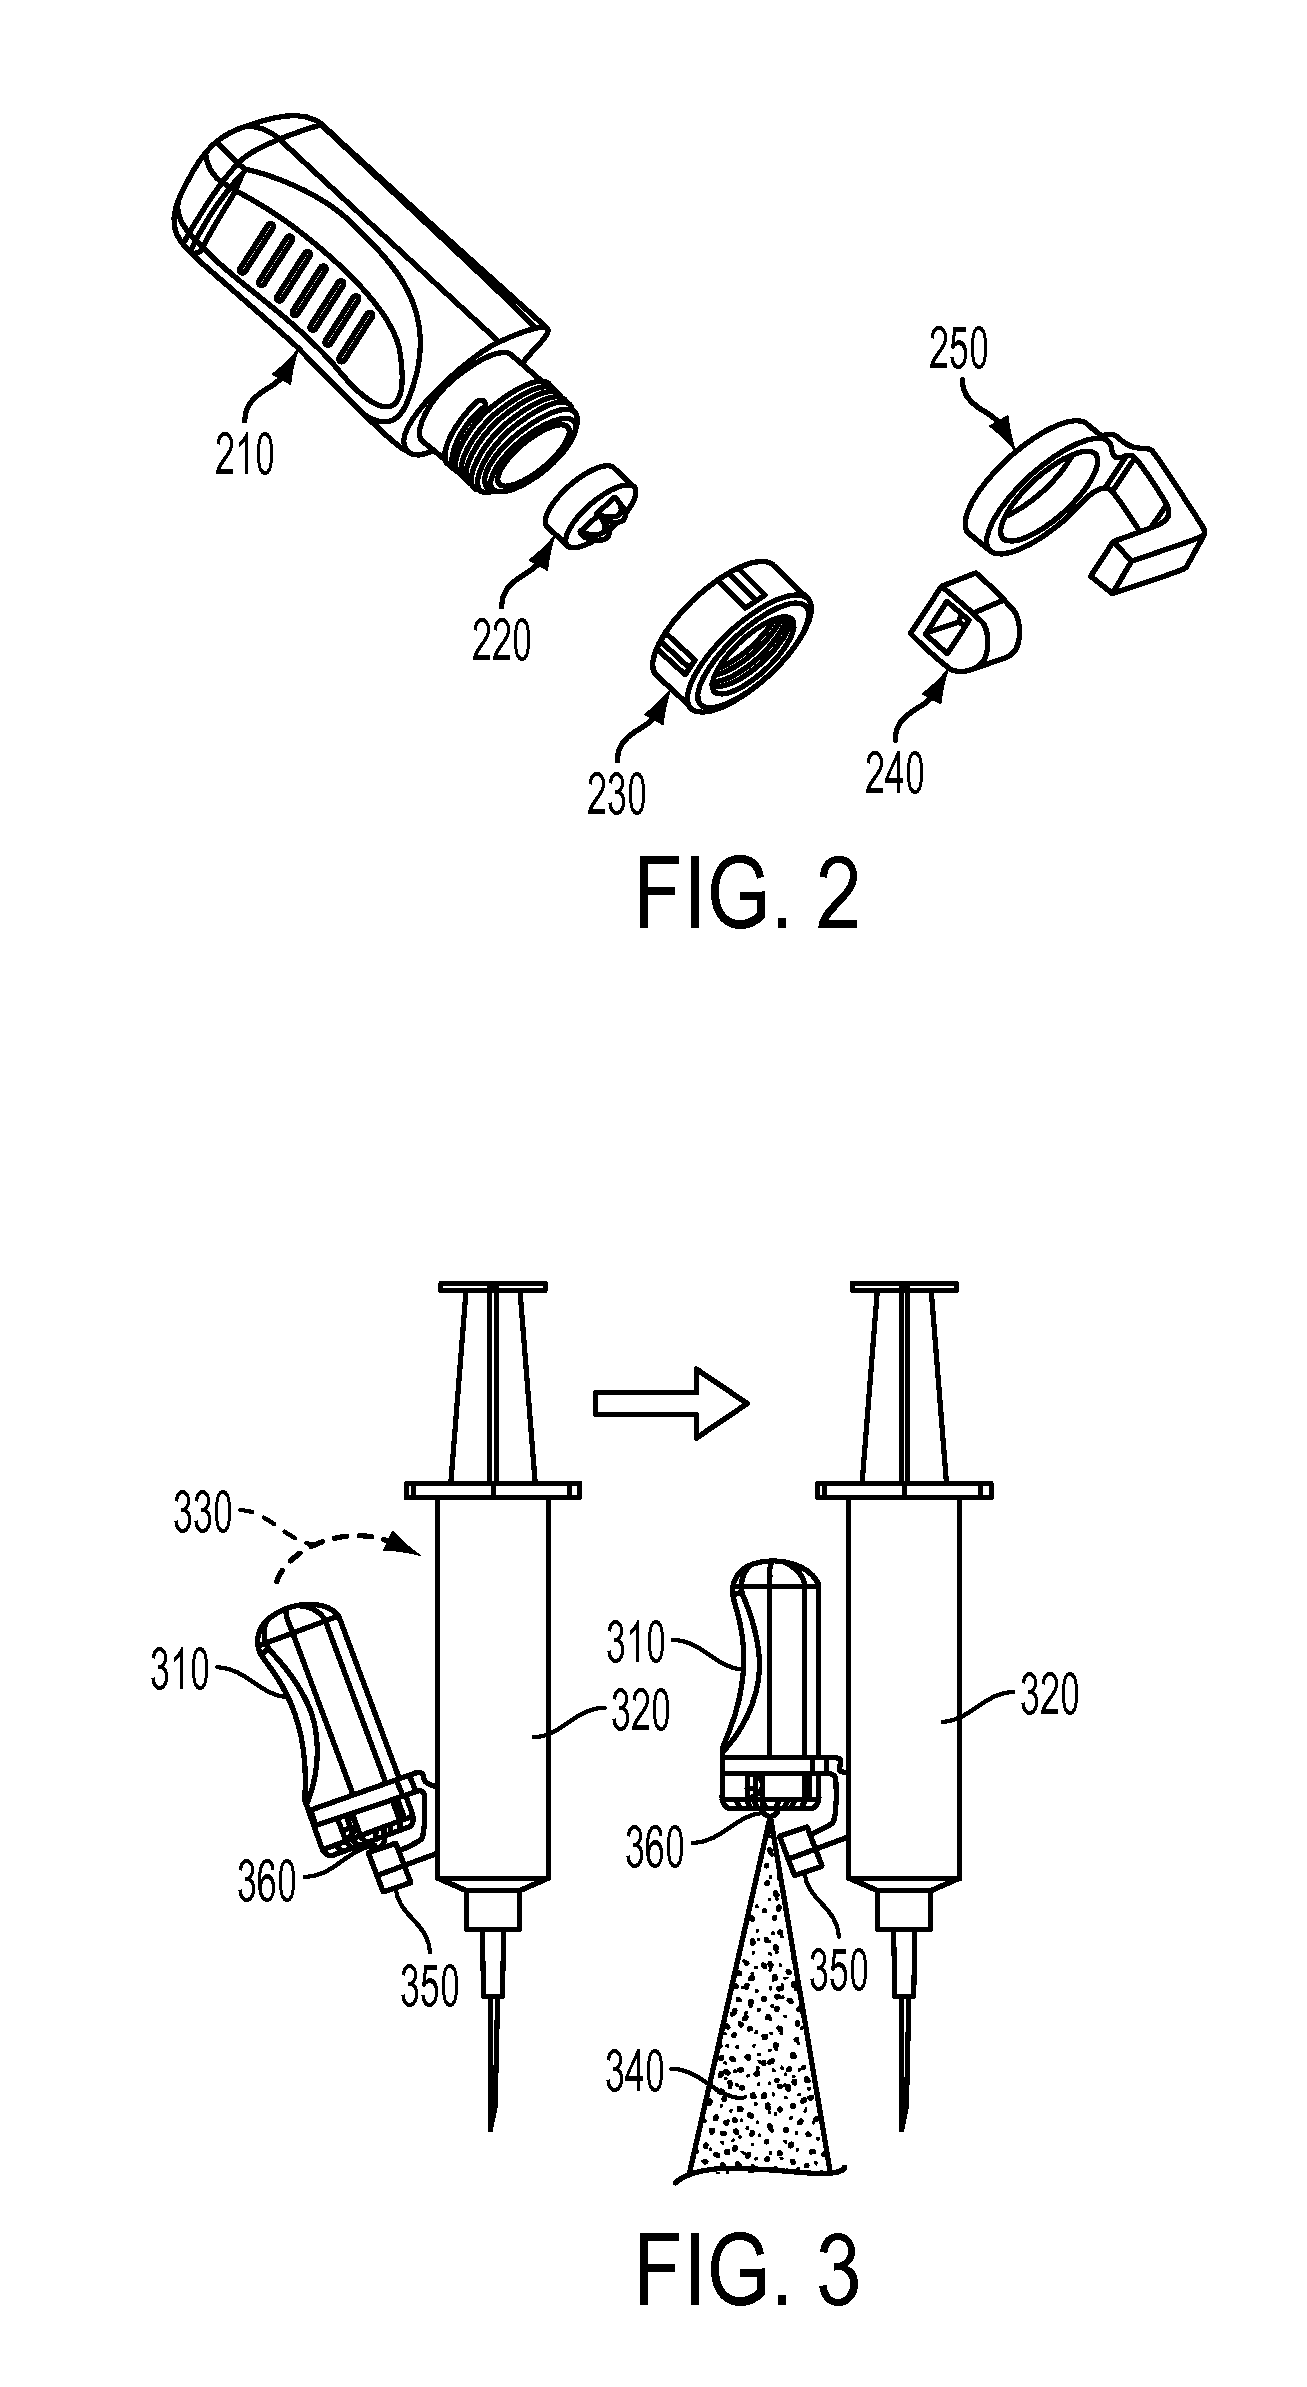 Topical anesthetic and antiseptic dispensing device